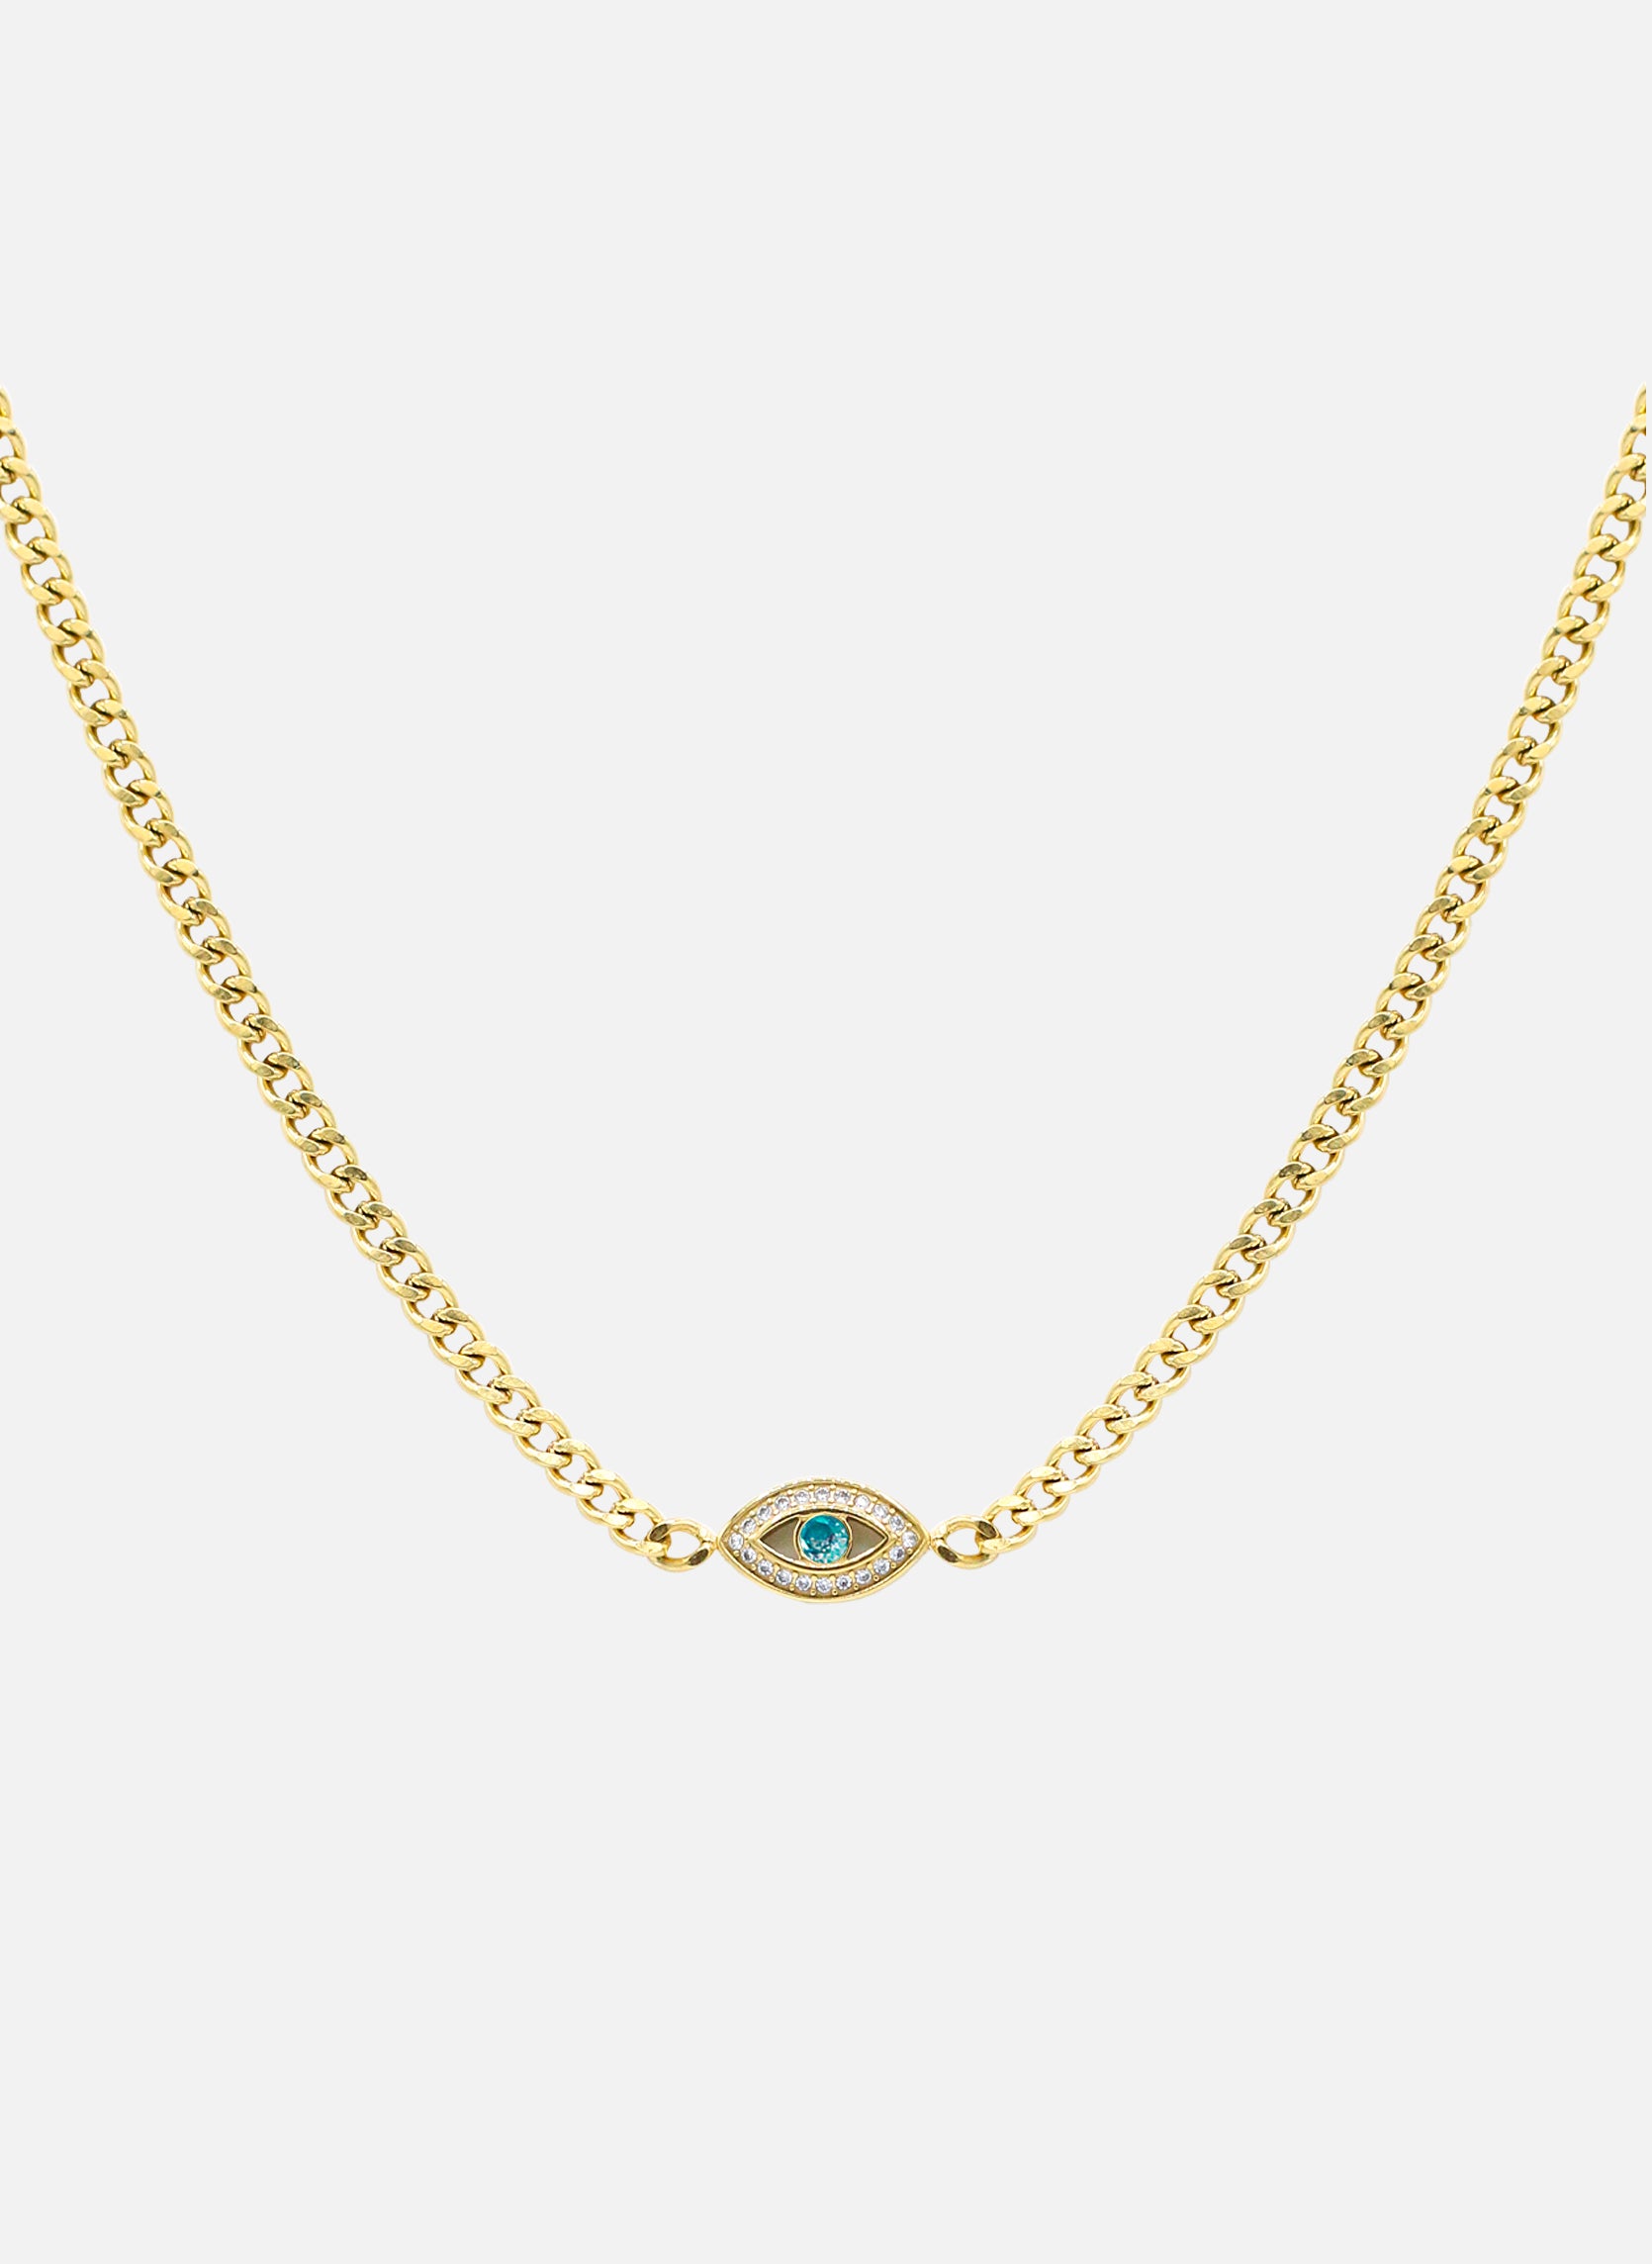 Chain necklace Neith